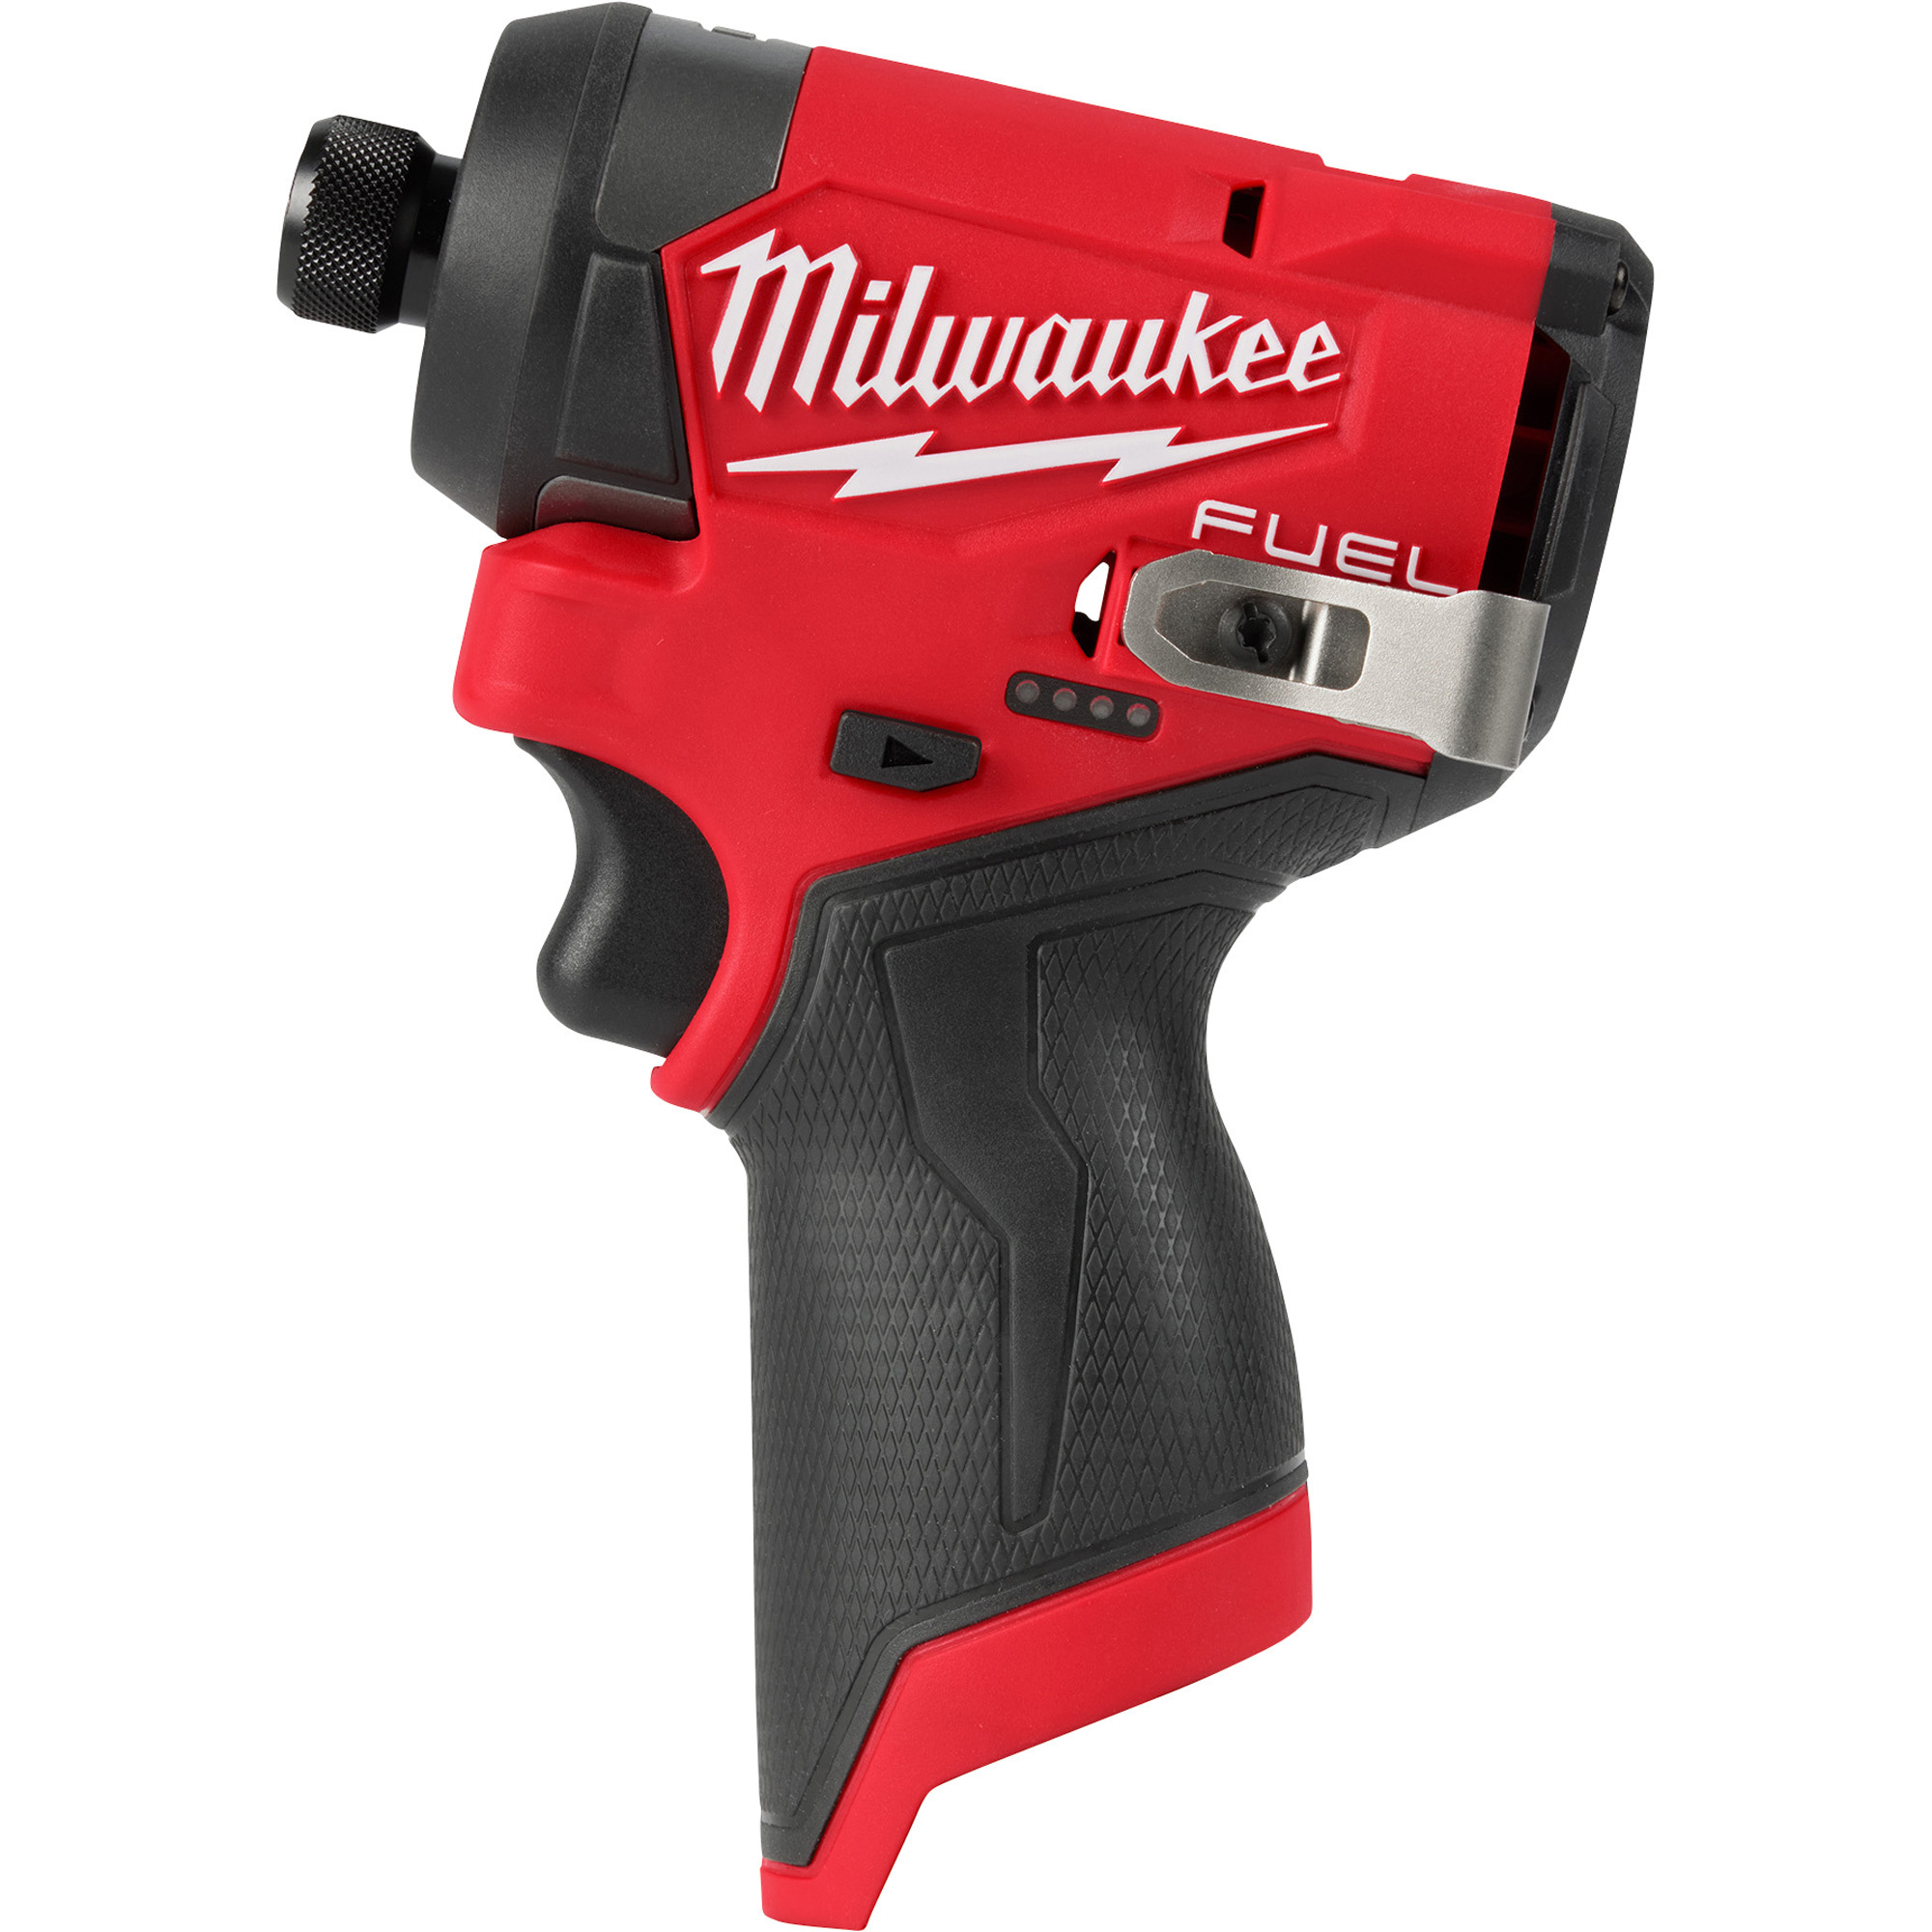 Milwaukee M12 FUEL 1/4Inch Hex Impact Driver, Tool Only, Model 3453-20